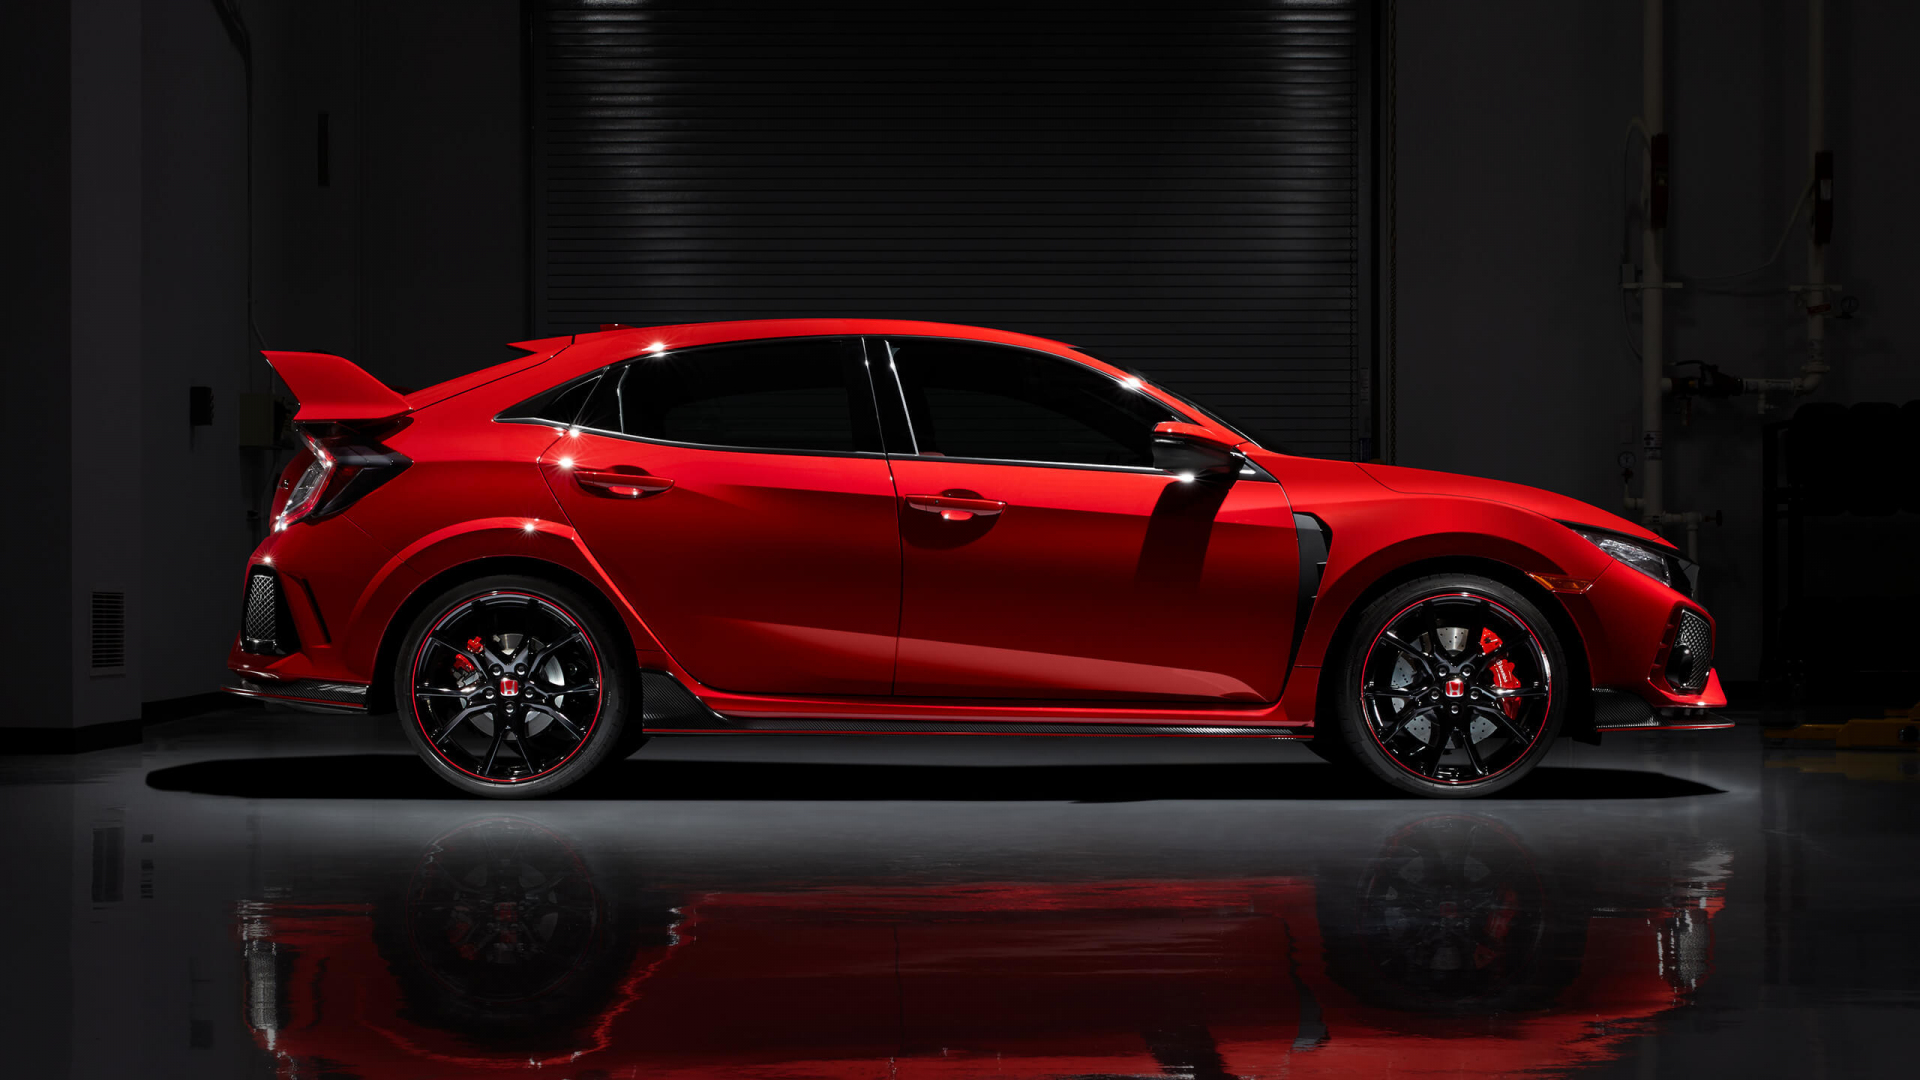 The Best Honda Civic Type R Wallpaper 1920x1080 - wallpaper quotes